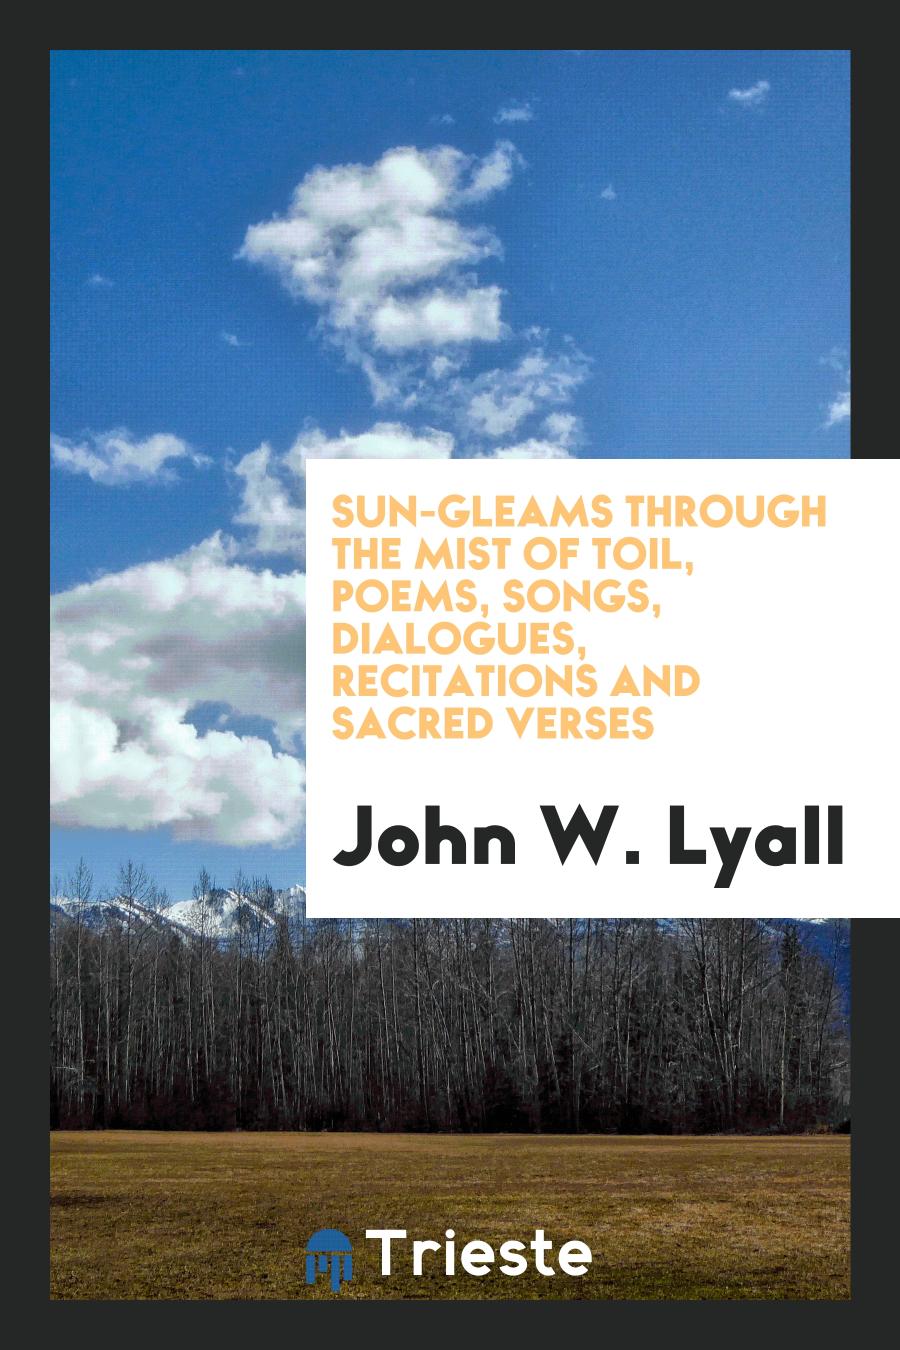 Sun-Gleams through the Mist of Toil, Poems, Songs, Dialogues, Recitations and Sacred Verses